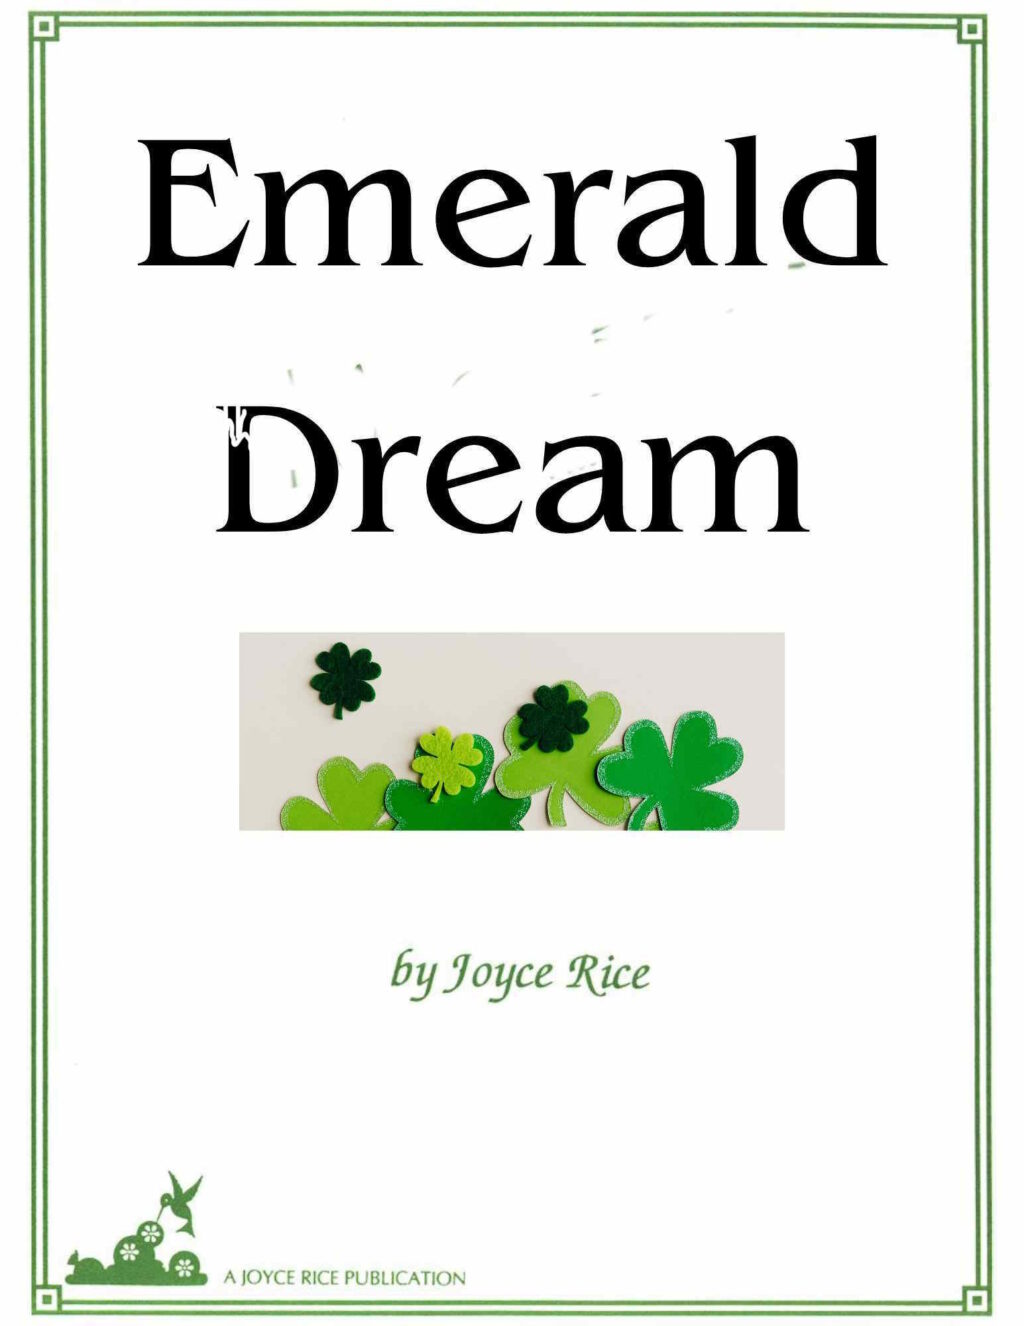 Emerald Dream Cover - music by Joyce Rice